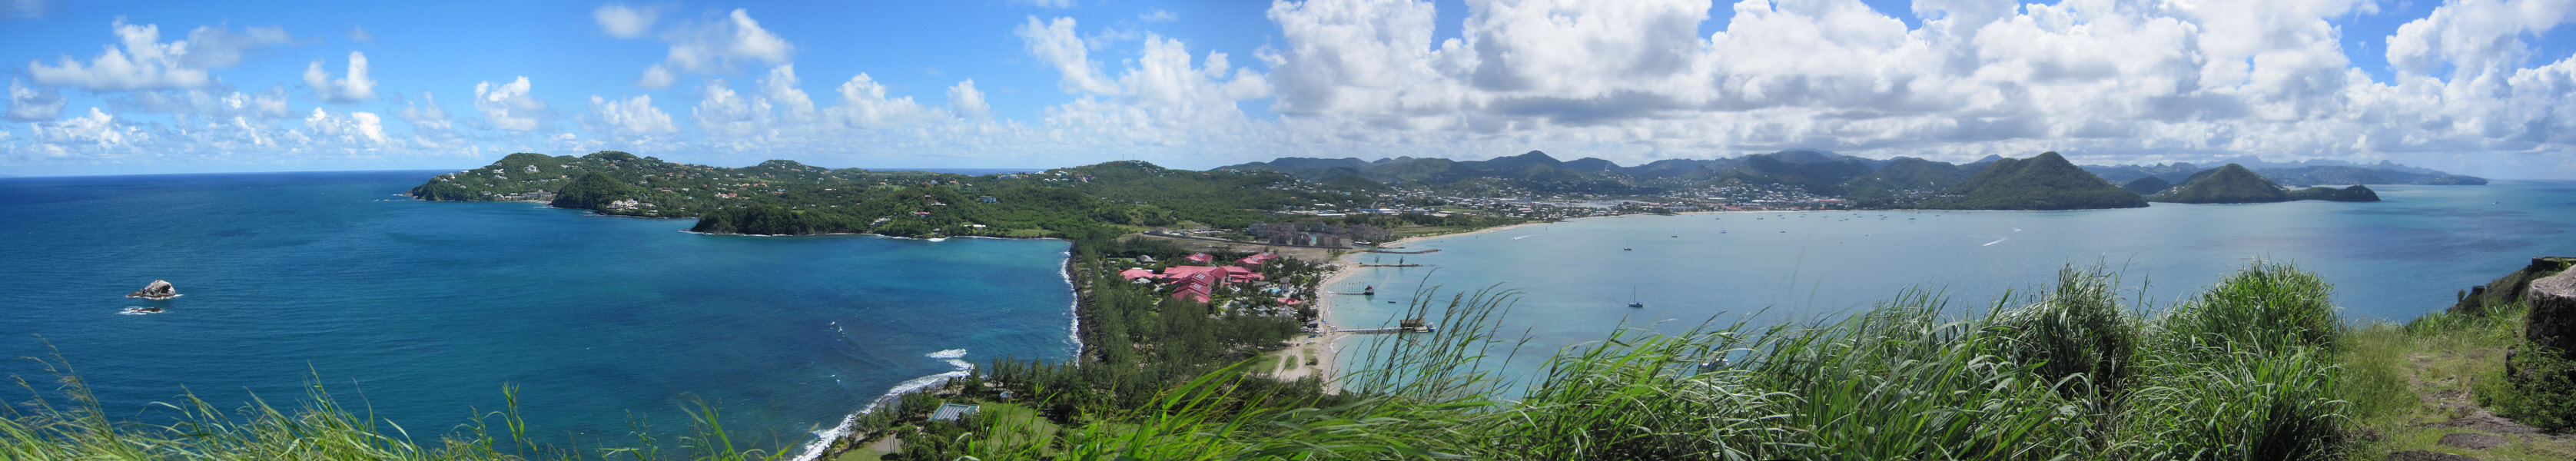 Panoramic view from the top of Signal Peak, from left to right: Cap Estate with the Atlantic beyond, Sandals Grande St Lucian on the
        causeway with the red roofs, Rodney Bay and the view down the west coast of St Lucia. Use the scroll bar to see a panoramic 180 degree view. (745k)